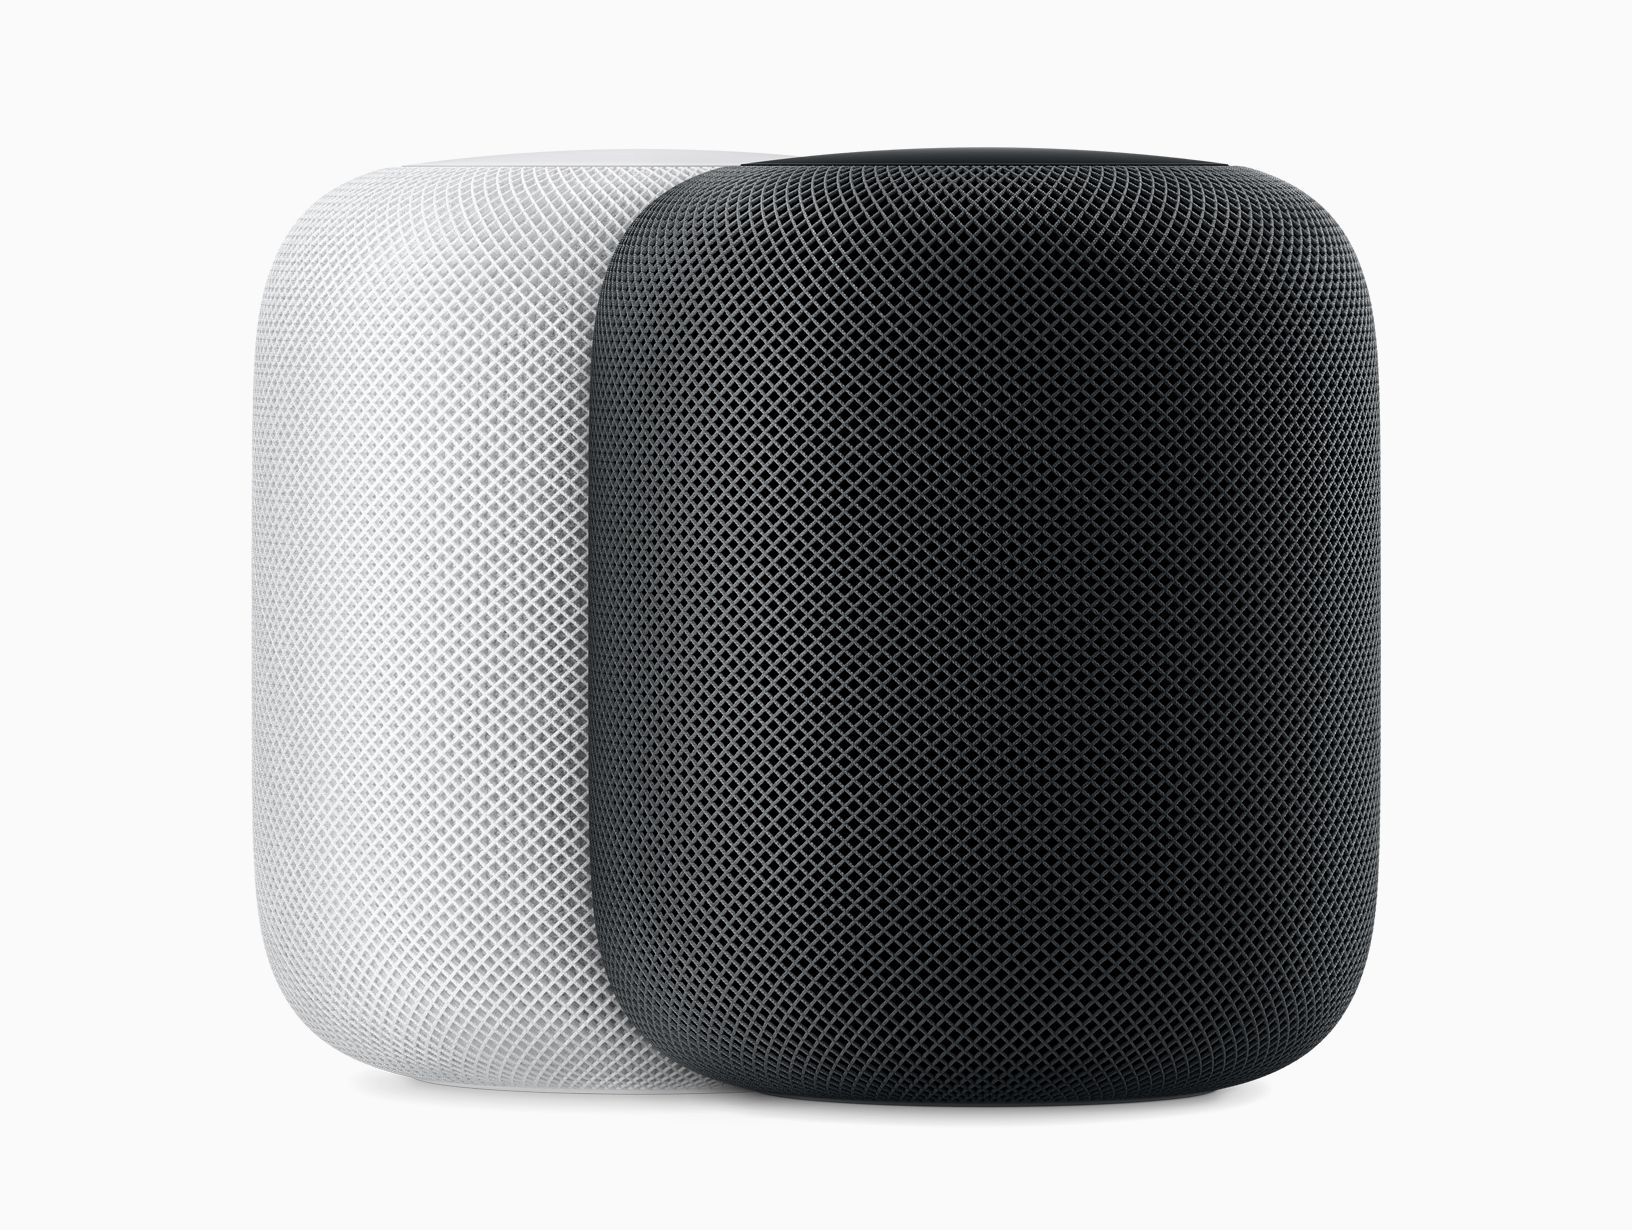 photo of First HomePod Jailbreak Stokes Speculation About Smart Speaker's Hacking Potential image